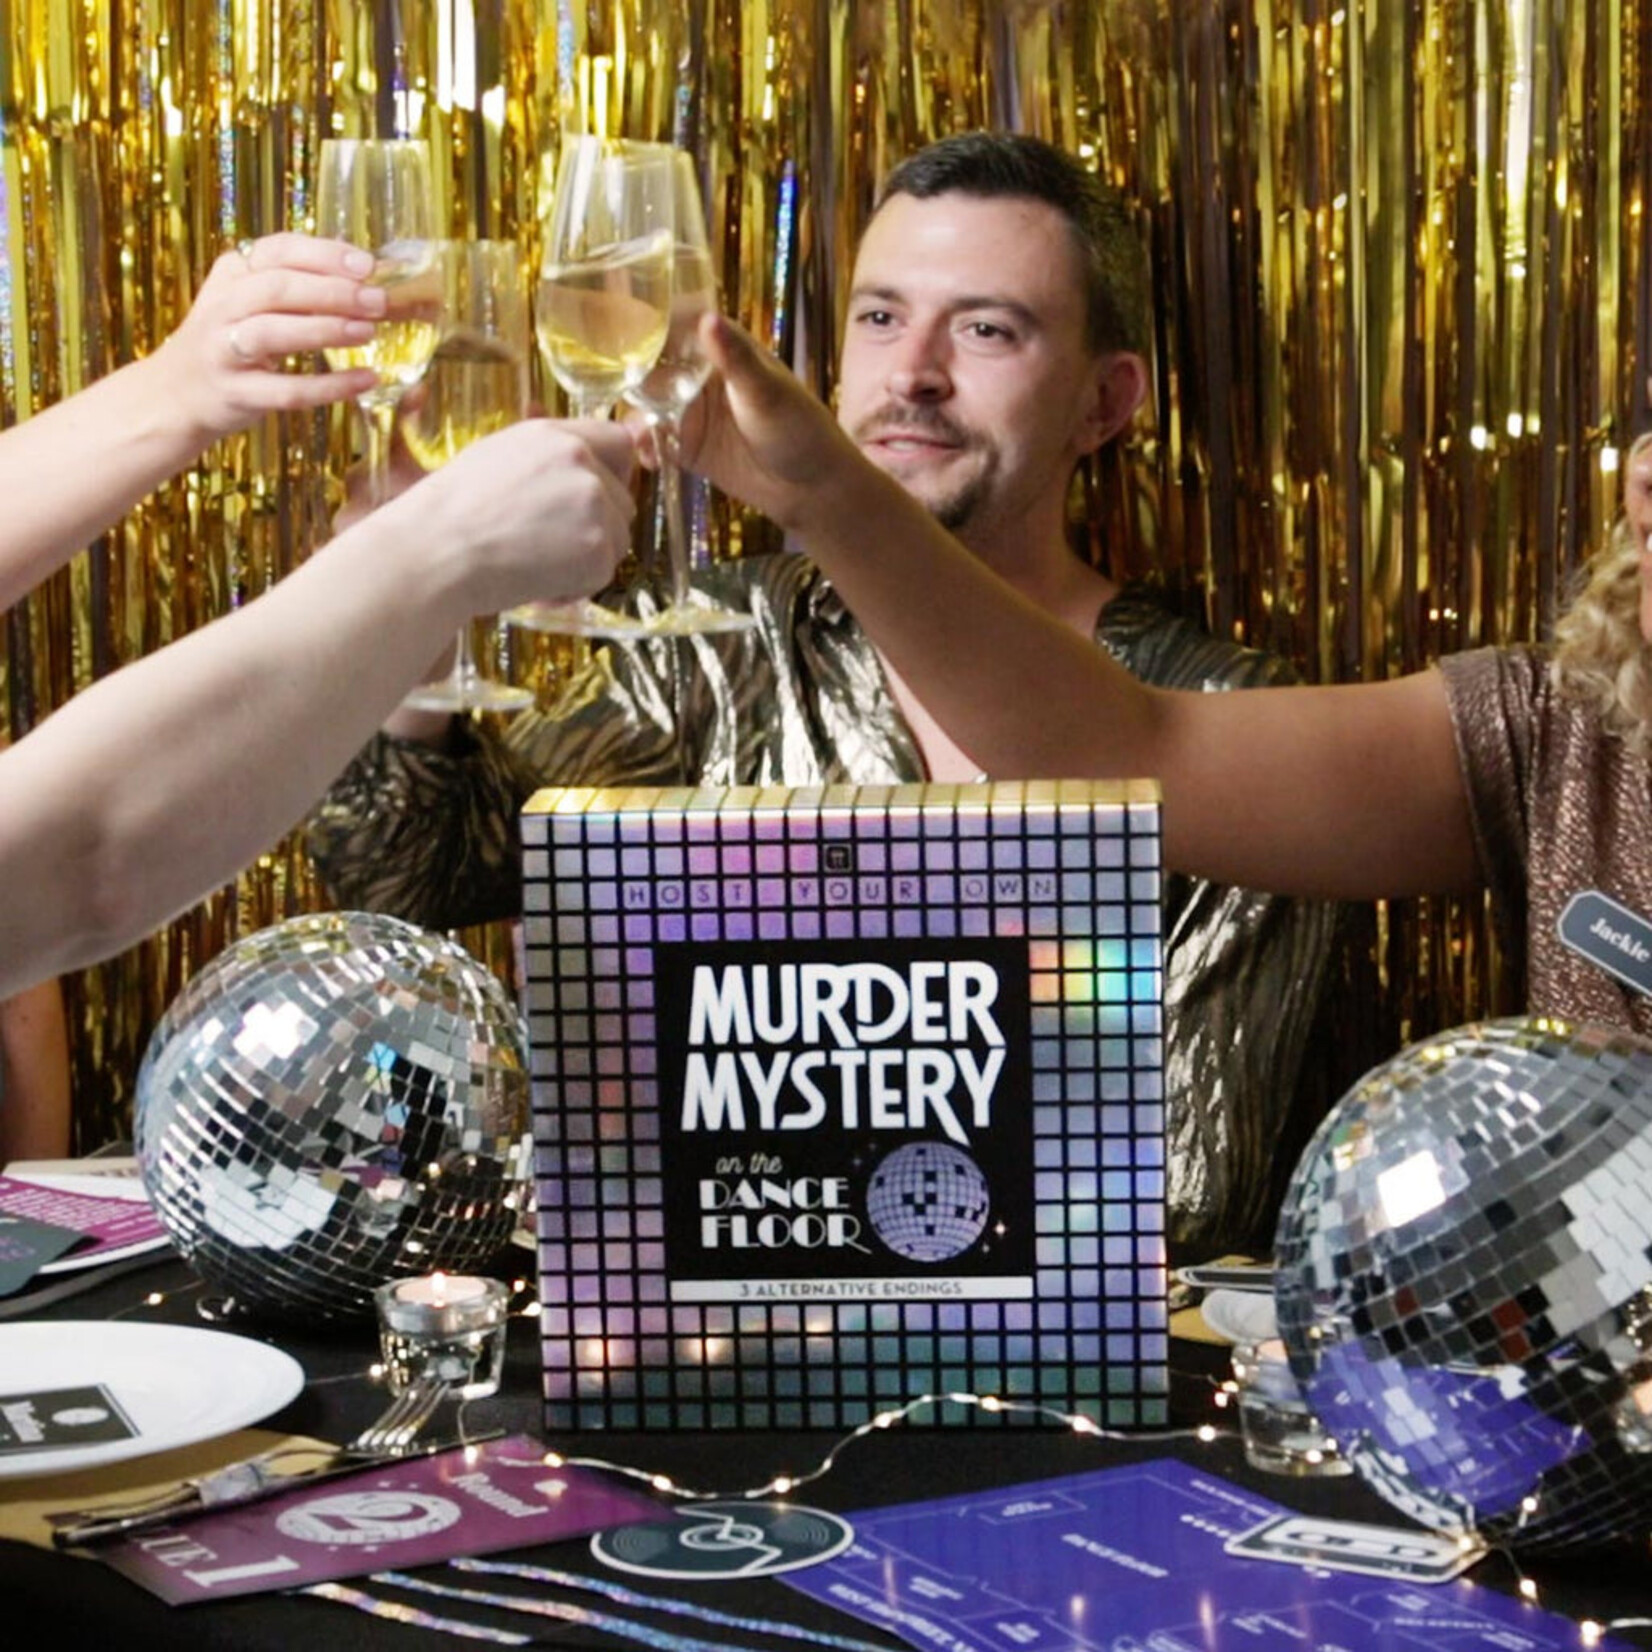 Talking Tables Host Your Own Murder Mystery on the Dance Floor